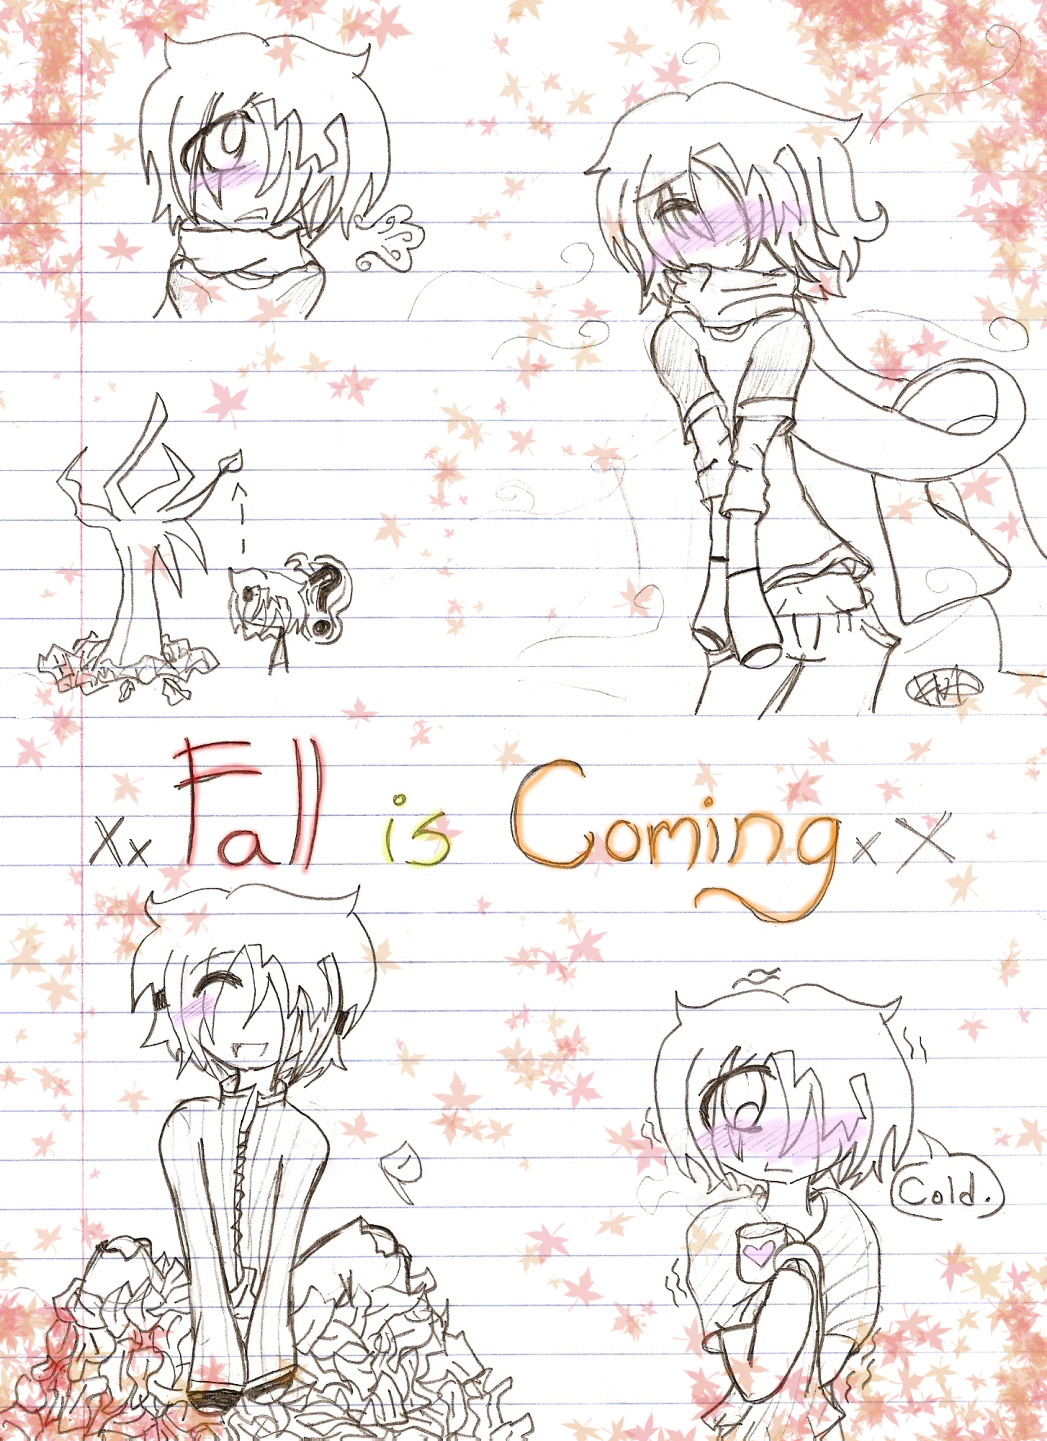 Xx Fall is Coming xX by B